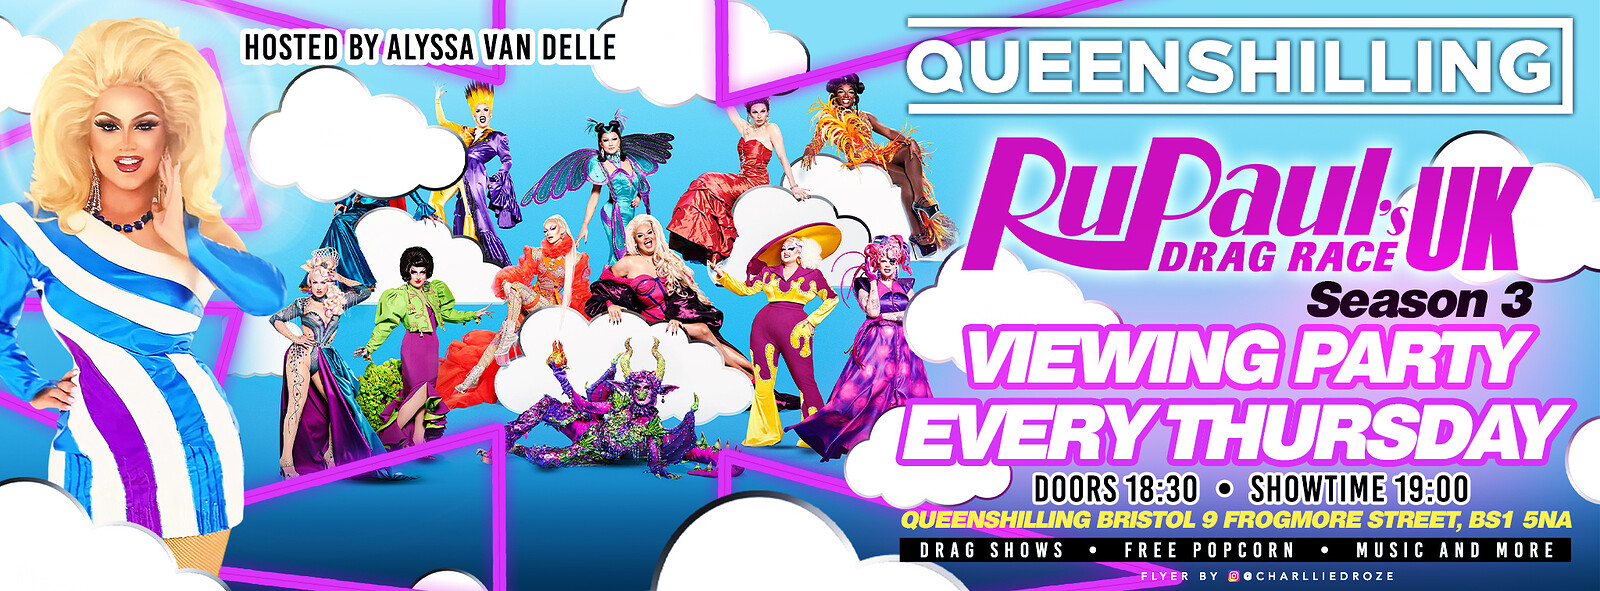 Drag race uk viewing party: episode 5 at Queenshilling